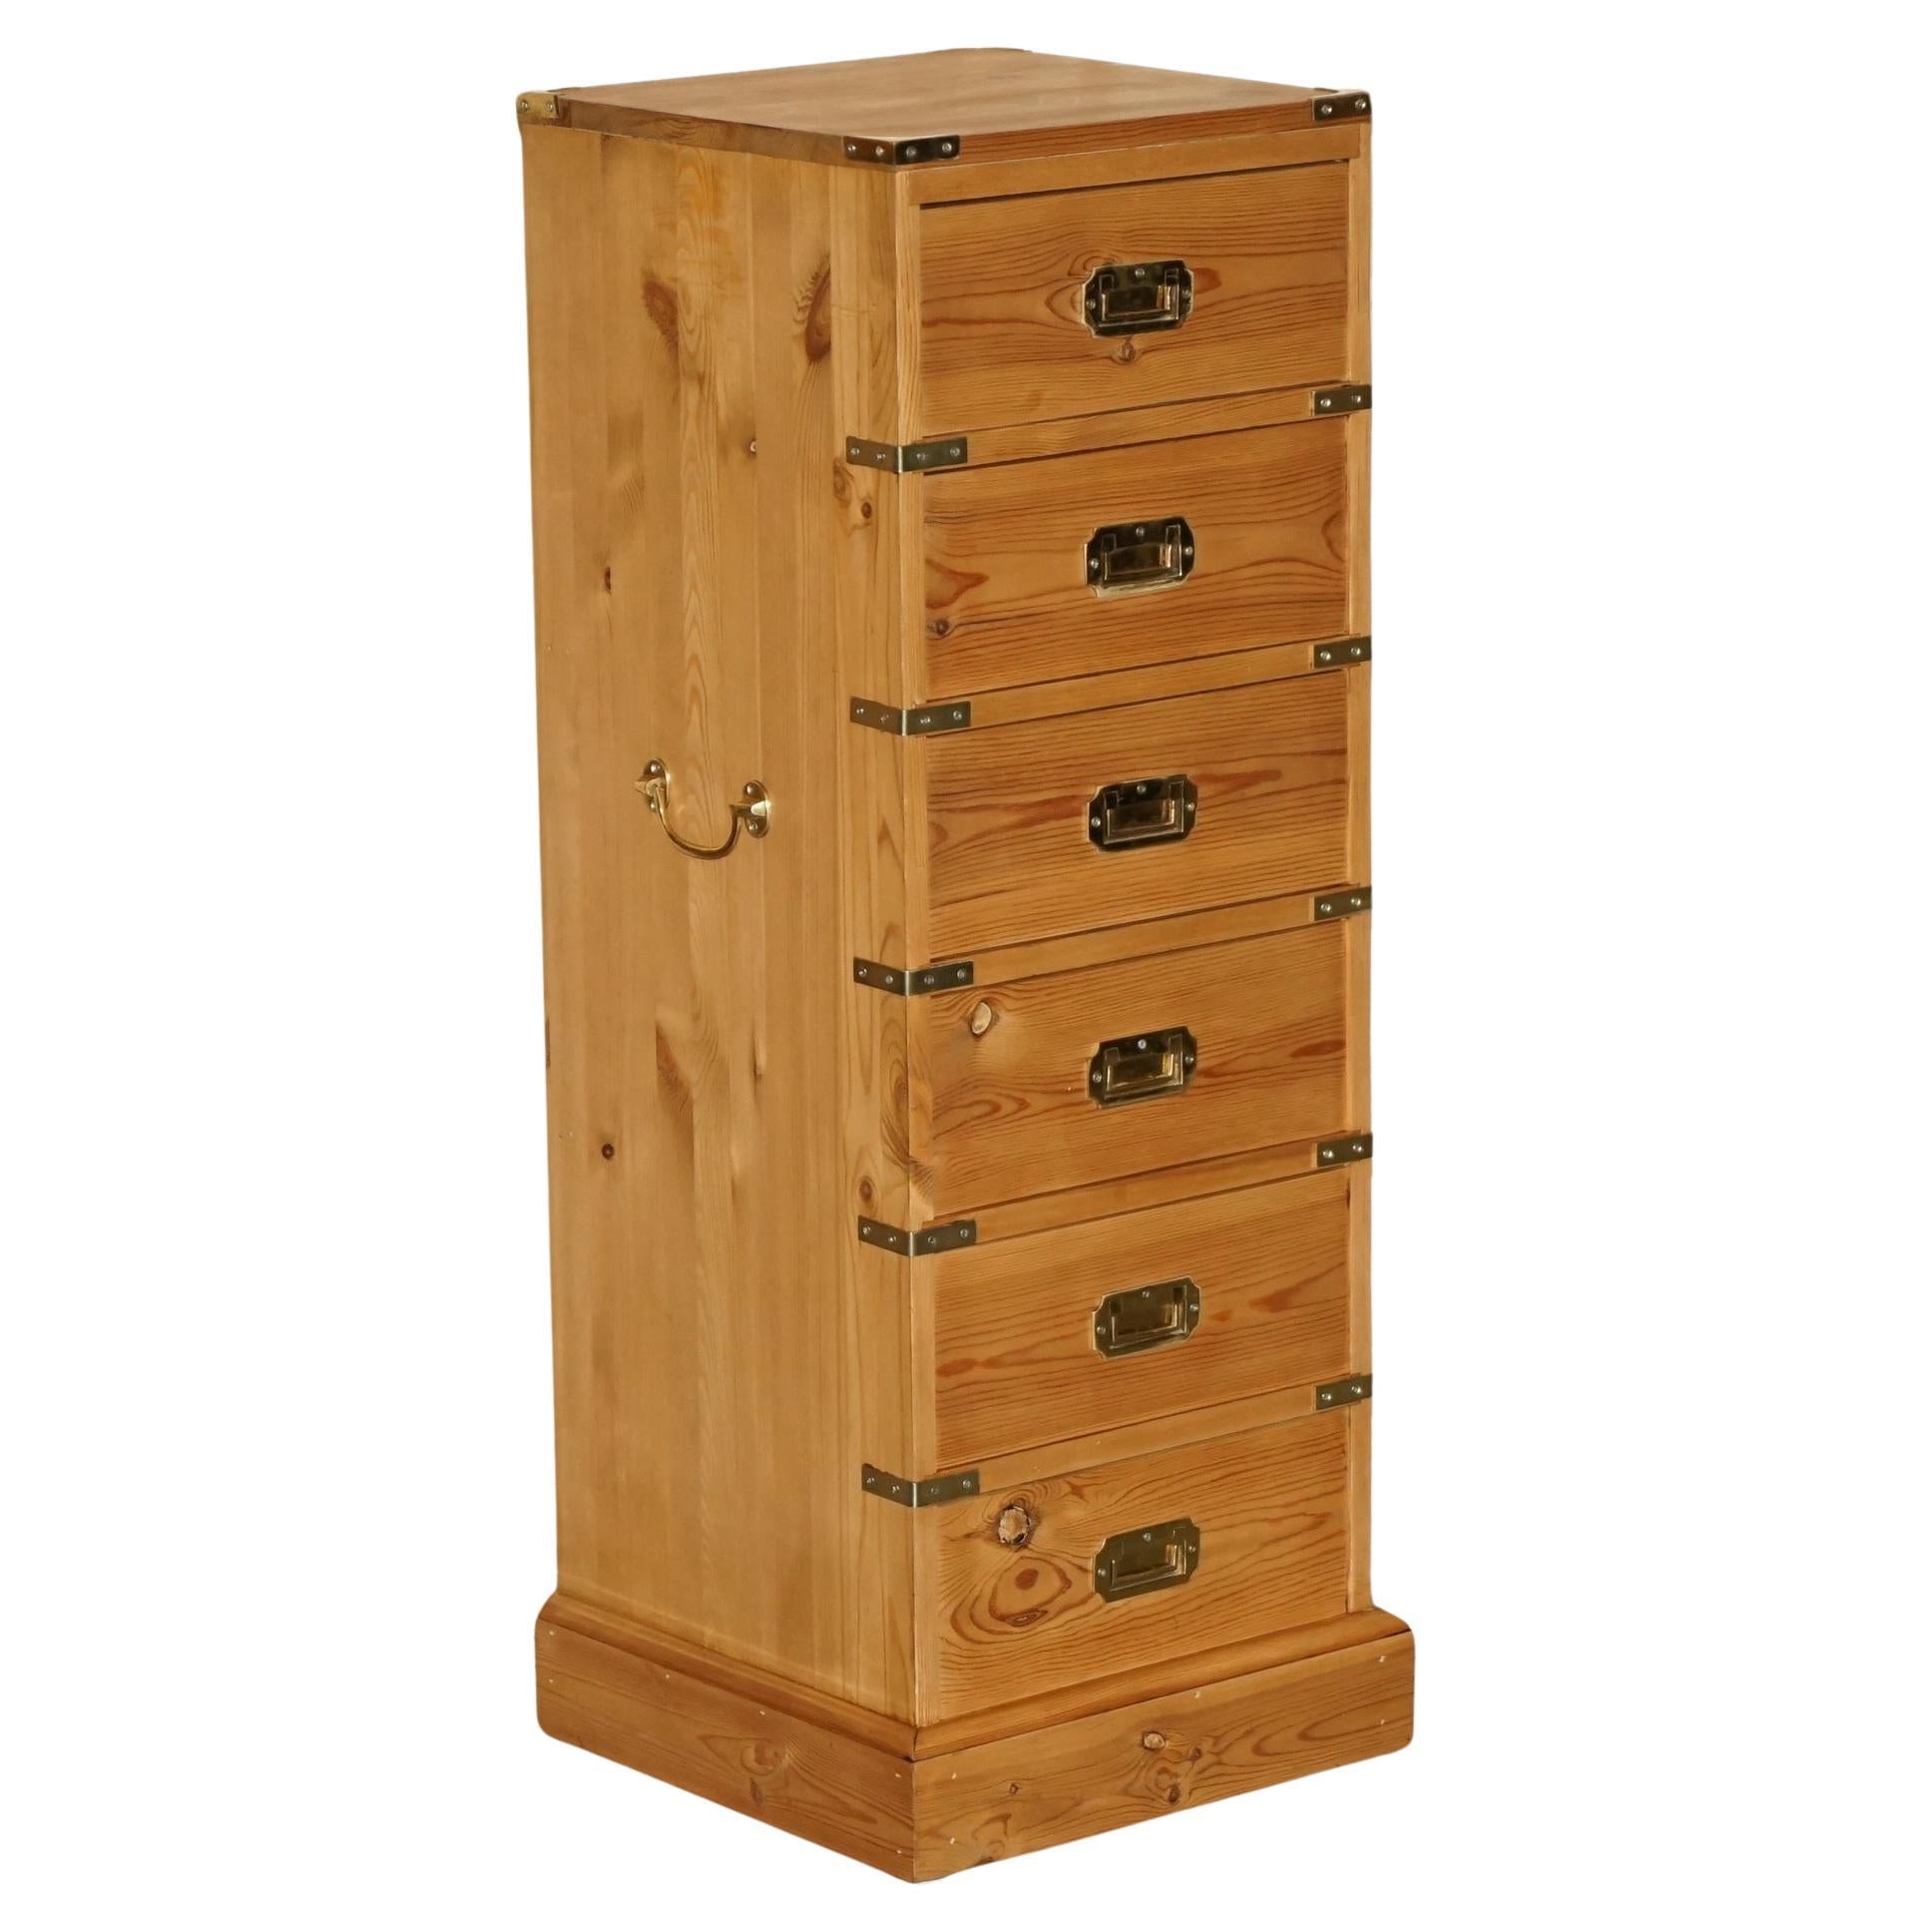 RESTORED ViNTAGE ENGLISH PINE & BRASS MILITARY CAMPIGN TALLBOY CHEST OF DRAWERS For Sale